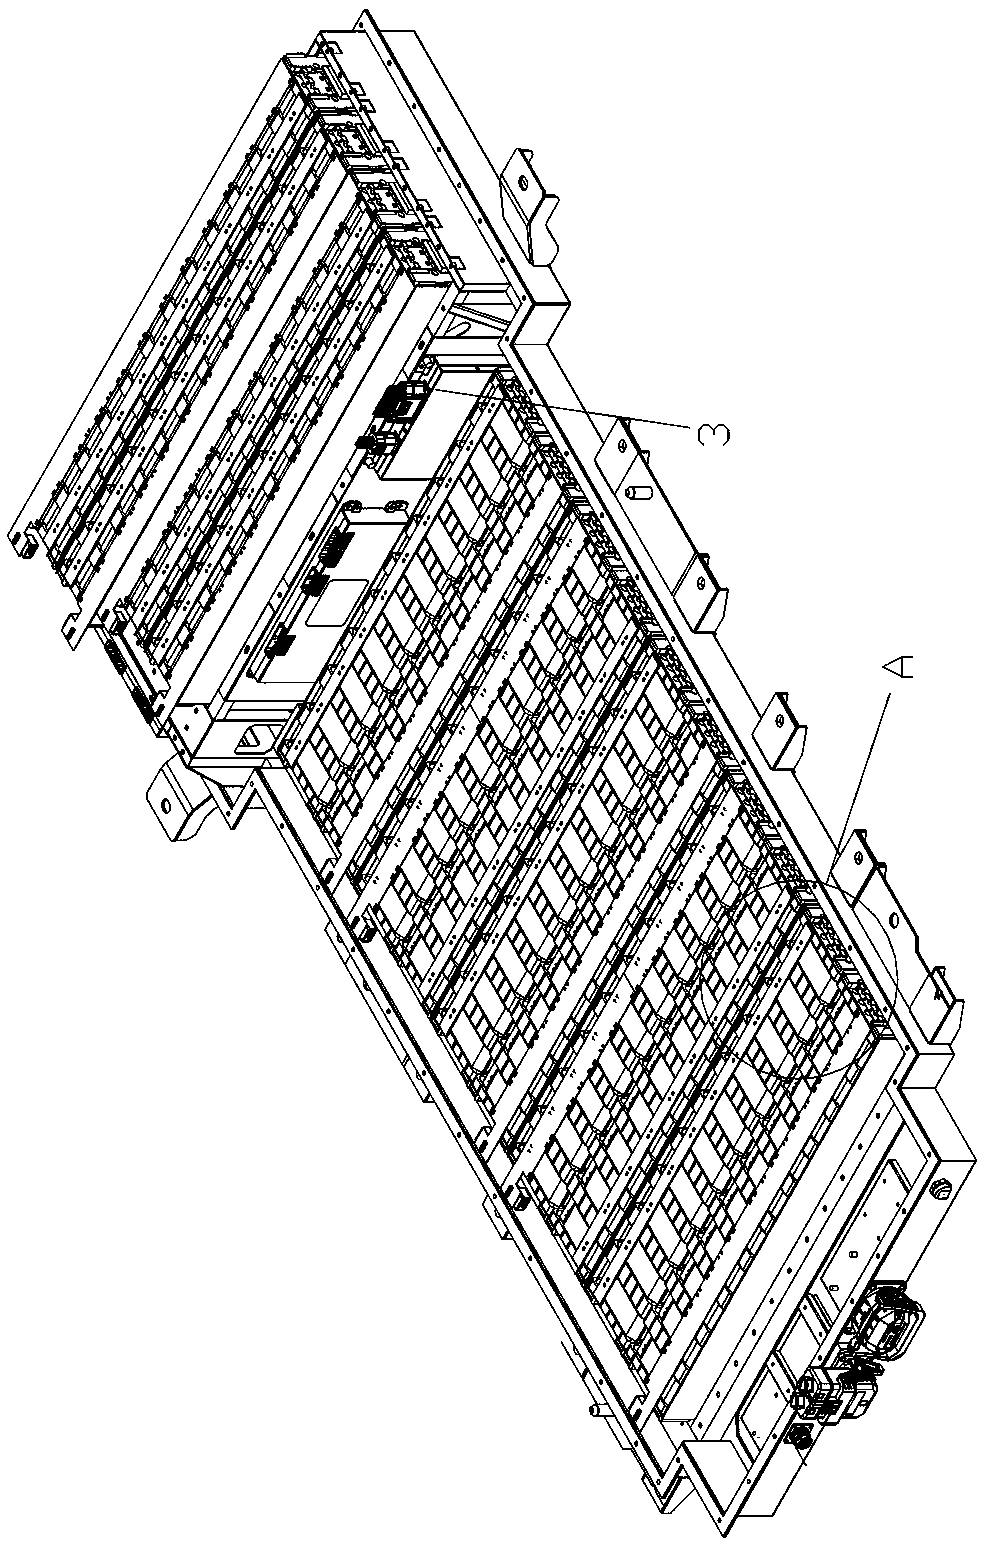 Lithium battery pack with self-heating system